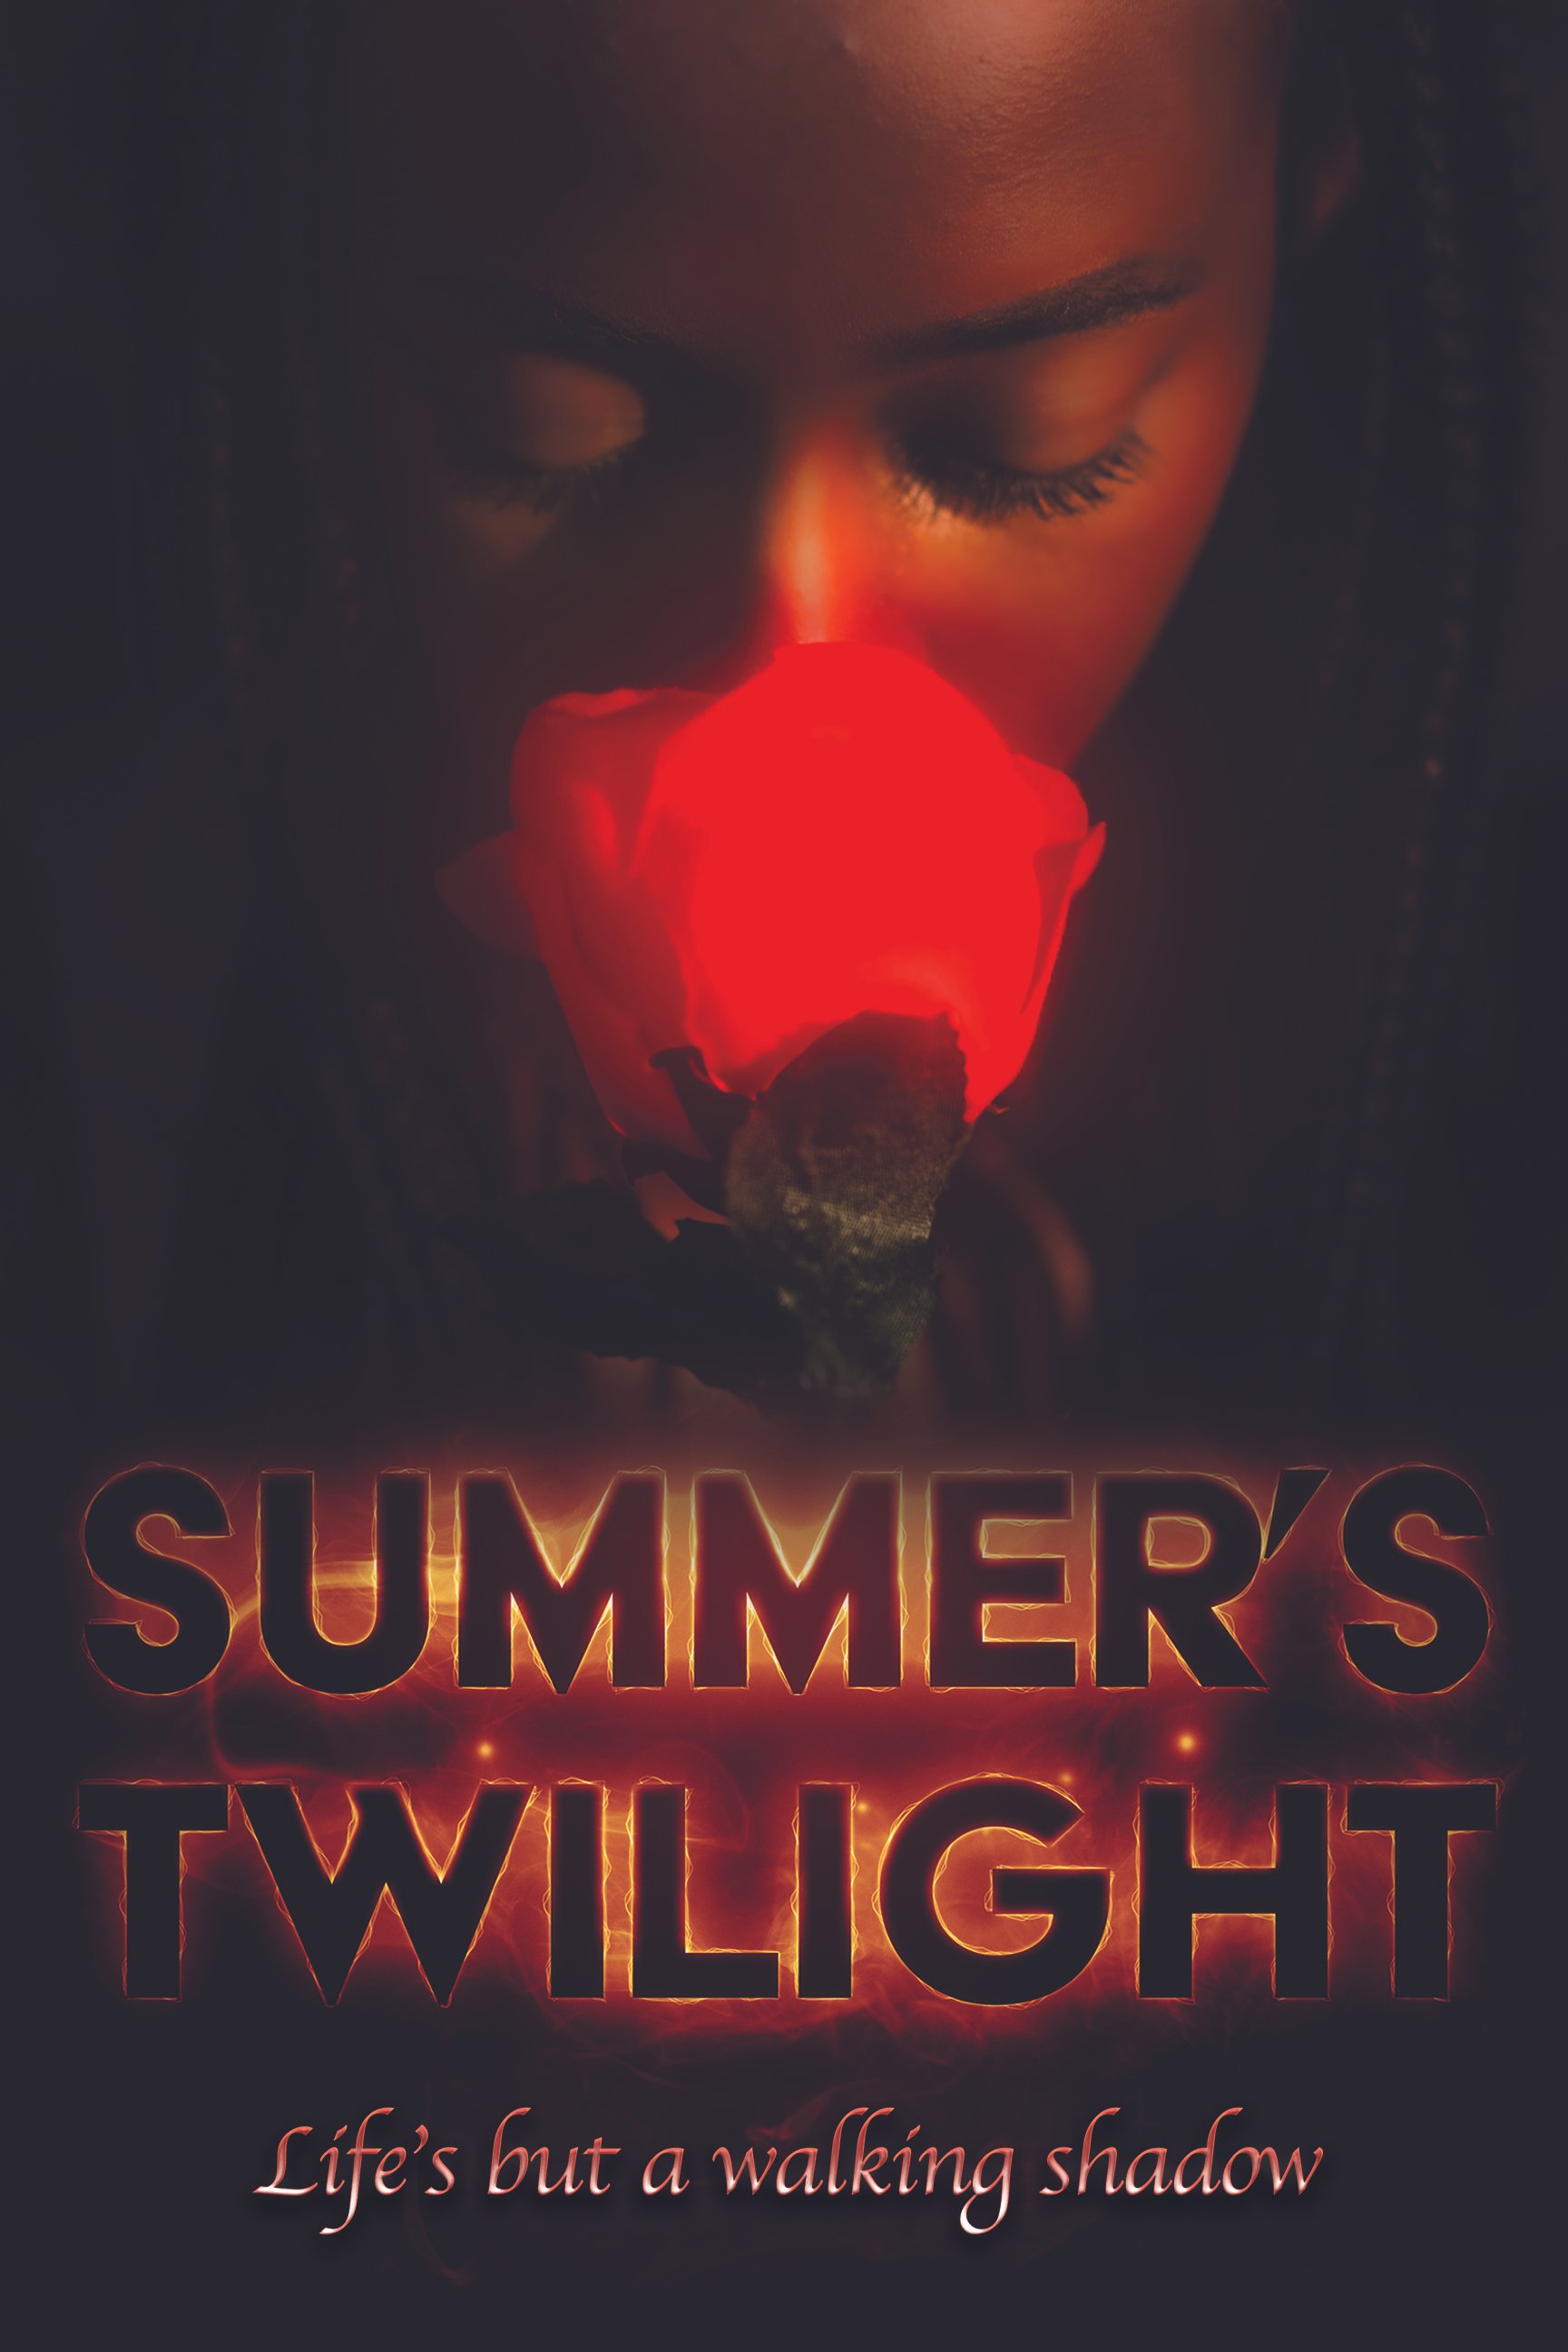 Summer's Twilight Poster - Young Lynch copy.jpg